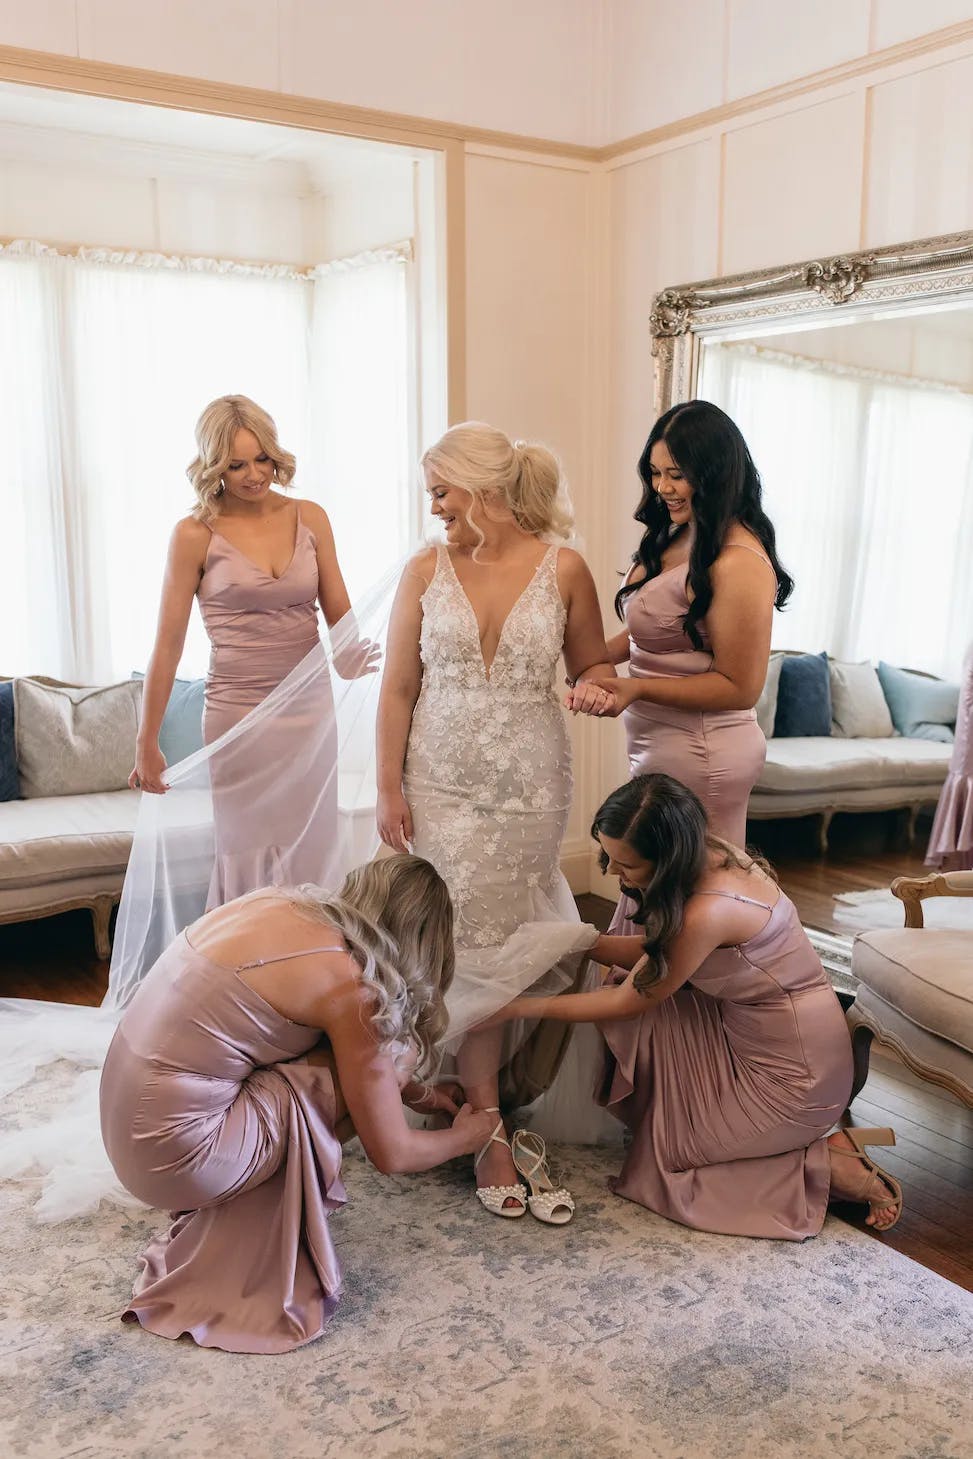 A bride in a lace wedding dress stands in the center of a room, surrounded by four bridesmaids in matching light purple dresses. Two bridesmaids adjust the bride's dress train, while the other two stand beside her, smiling. The room is elegantly decorated.